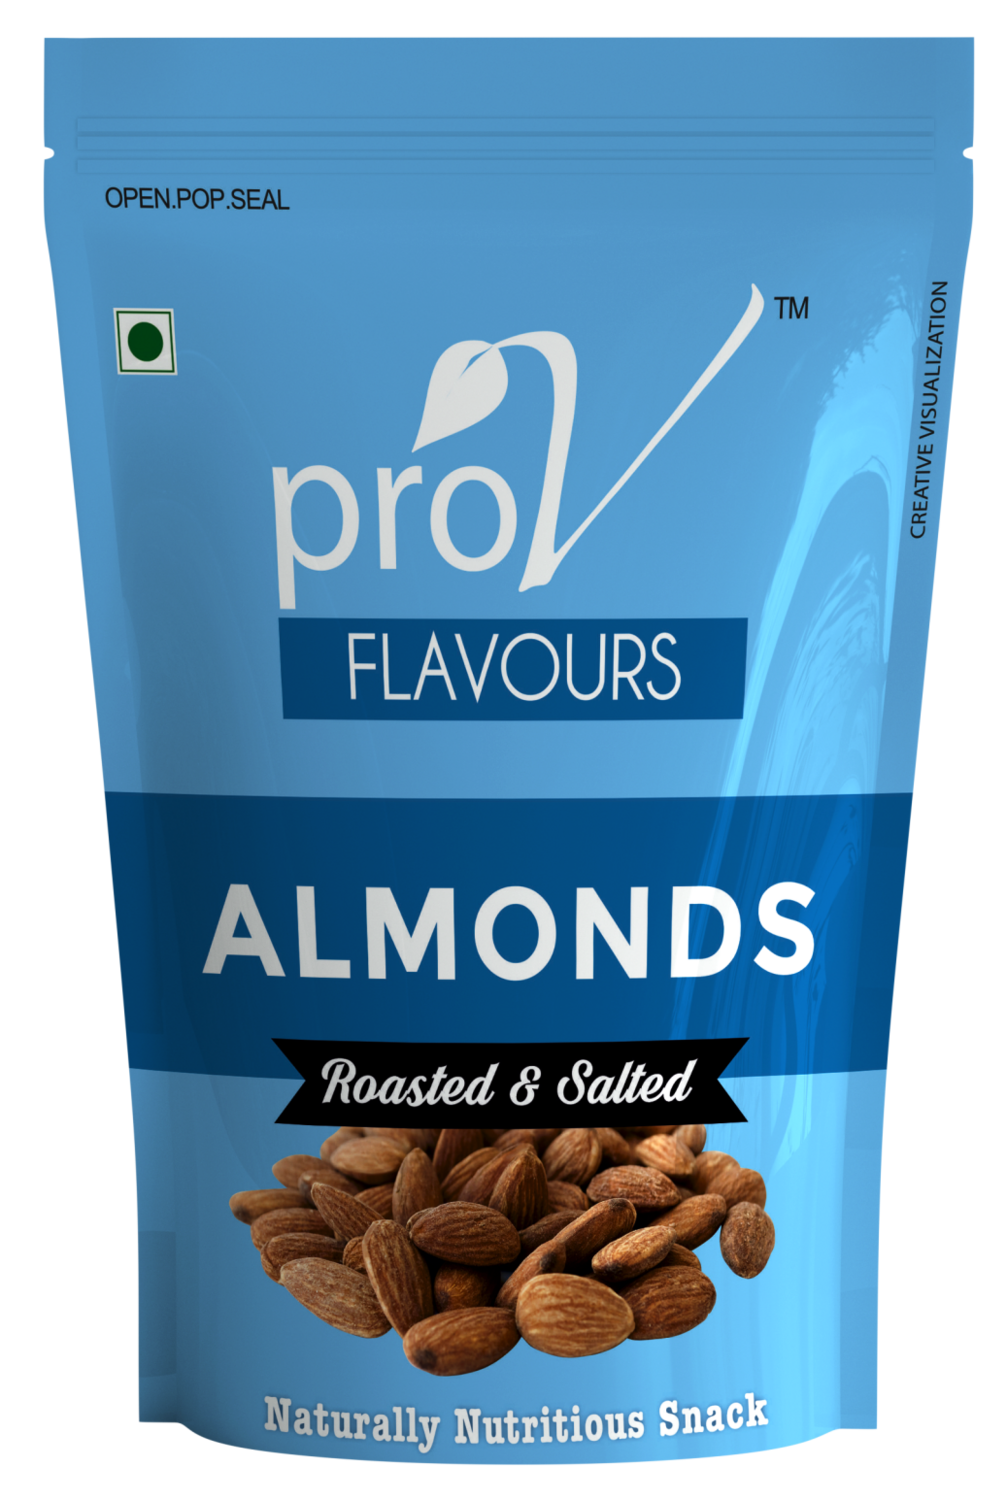 ProV Flavours - Almonds Roasted & Salted 200g